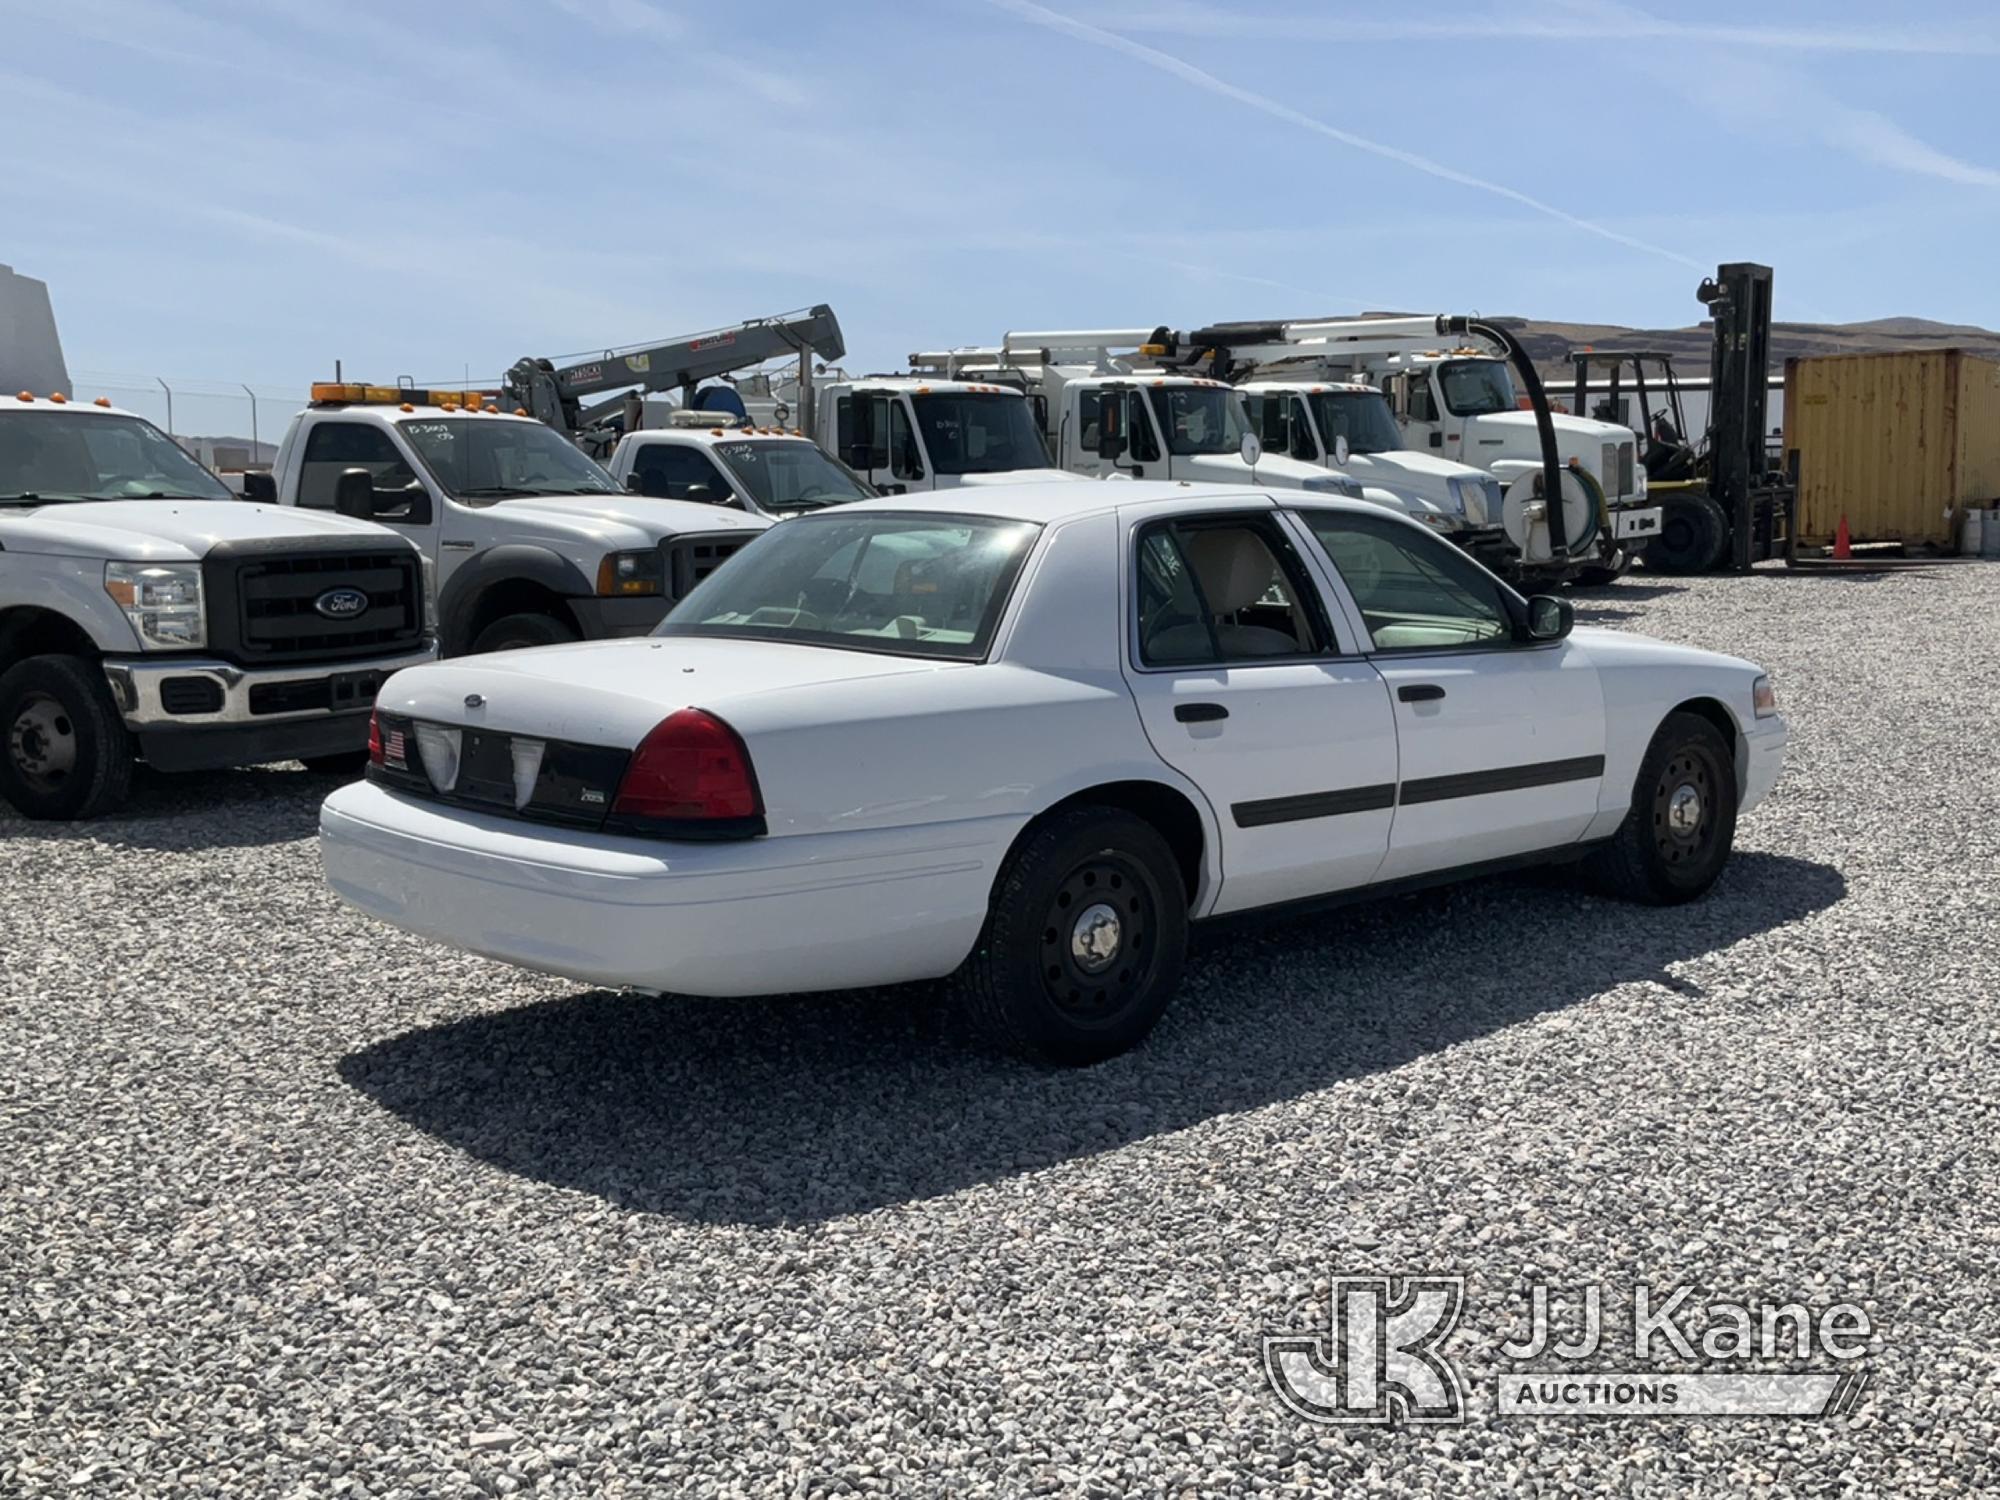 (Las Vegas, NV) 2011 Ford Crown Victoria Police Interceptor Towed In, Transmission Issue, Interior D